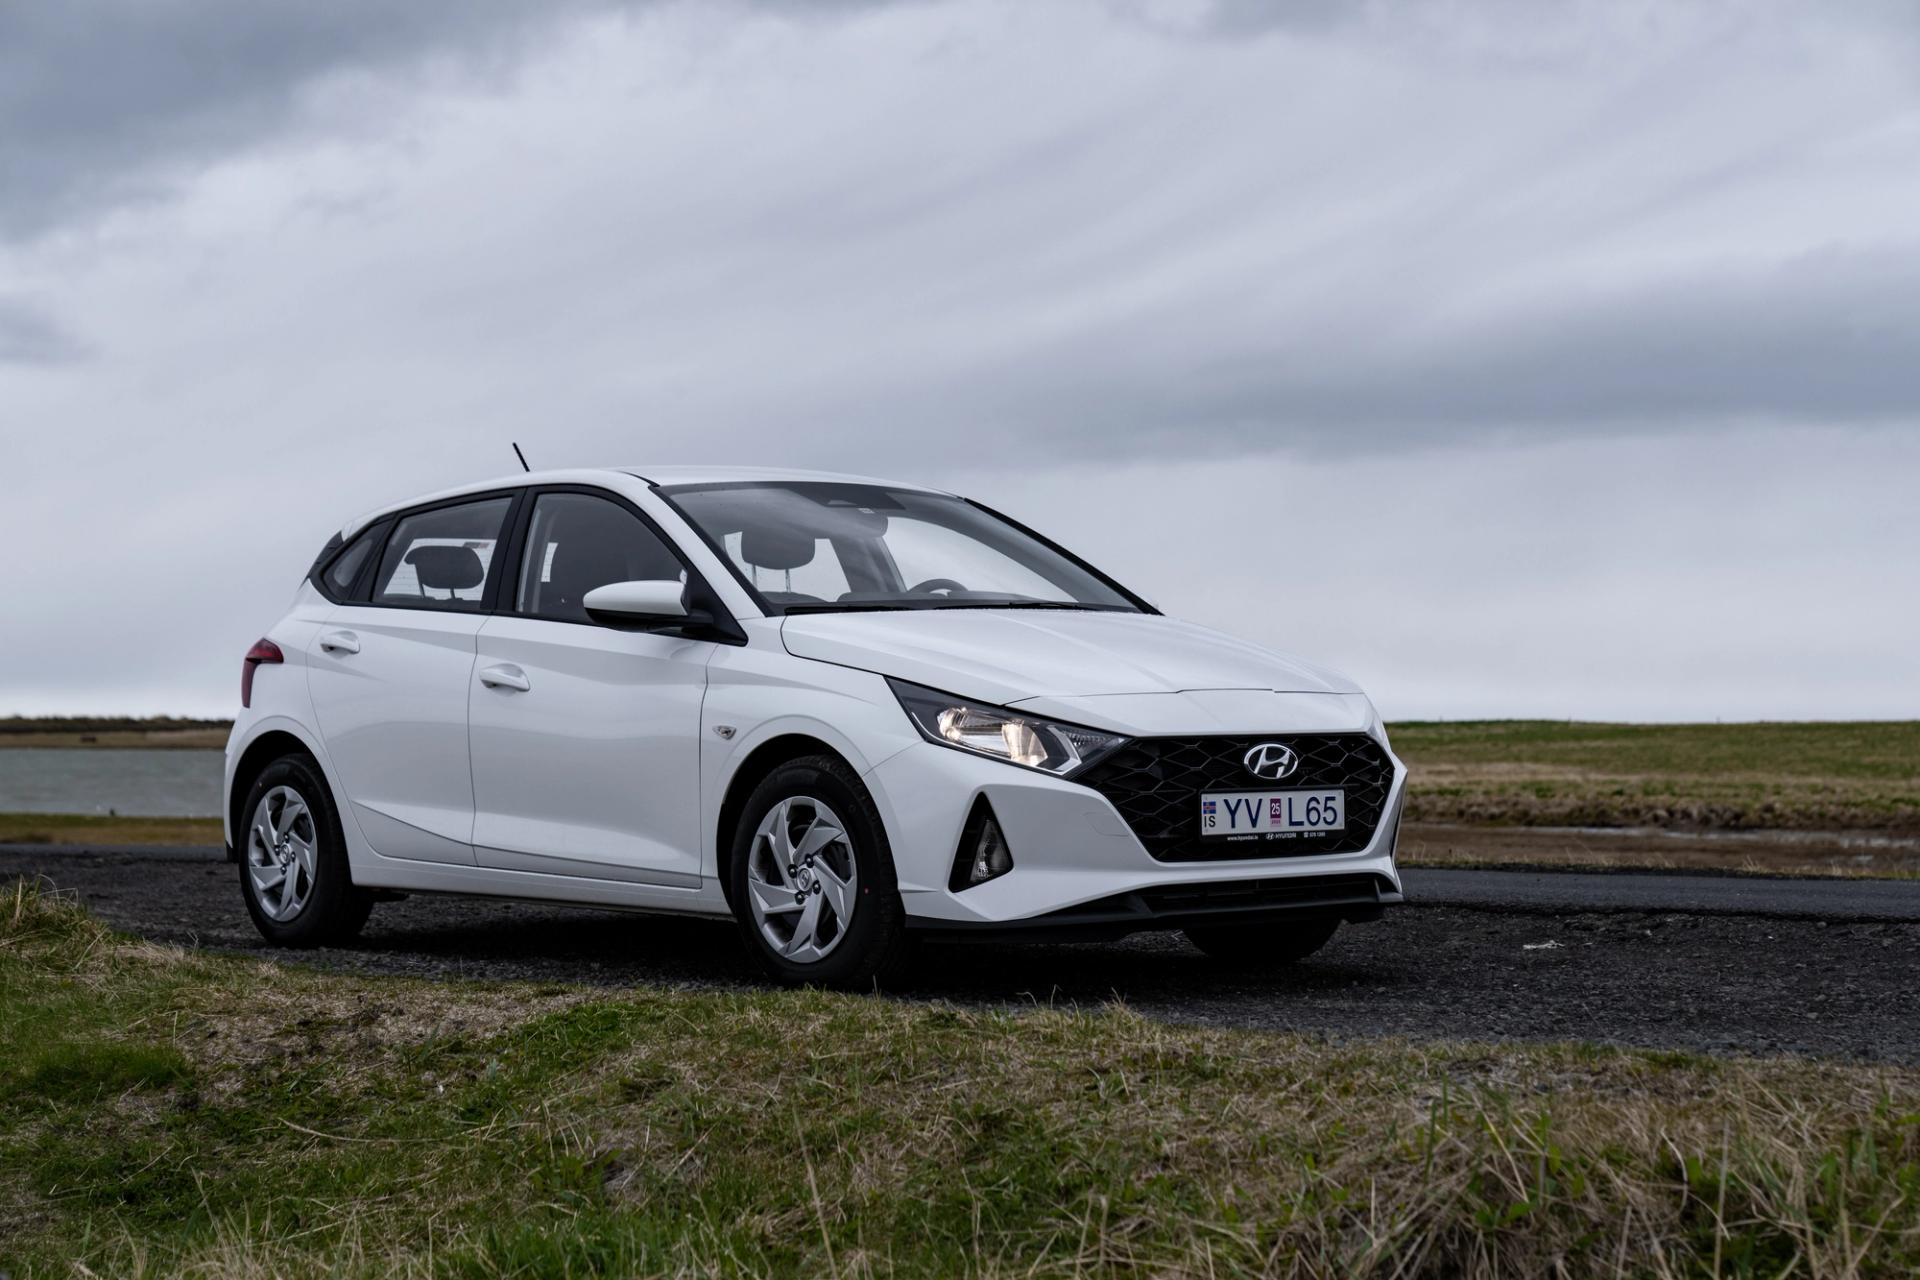 Hyundai i20 rental car in Iceland parked on a gravel road